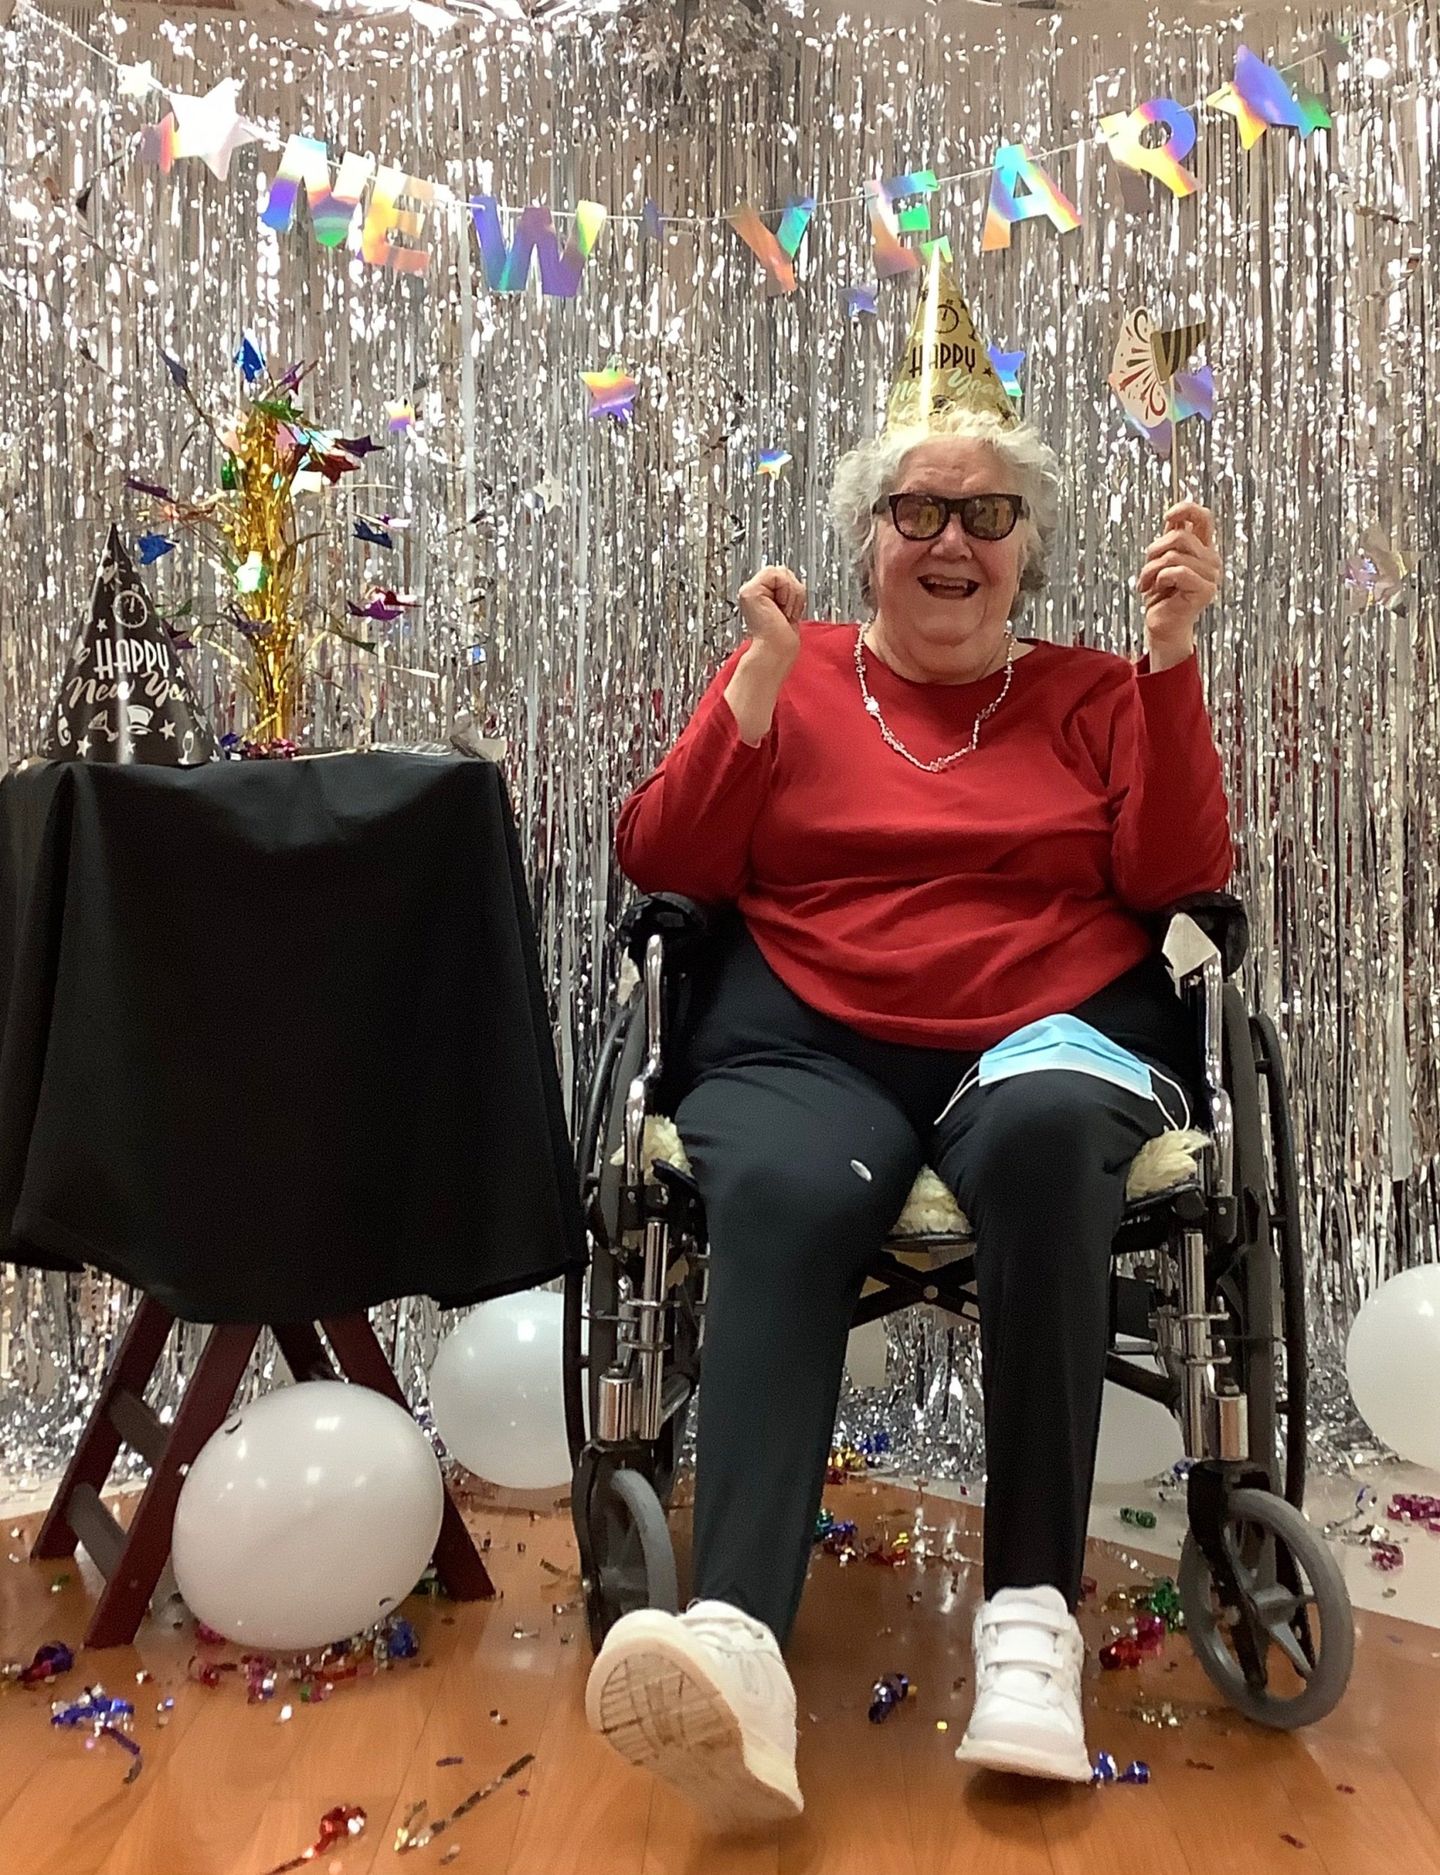 Elder celebrating New Years with decorations at Lenawee Medical Care Facility in Adrian, MI